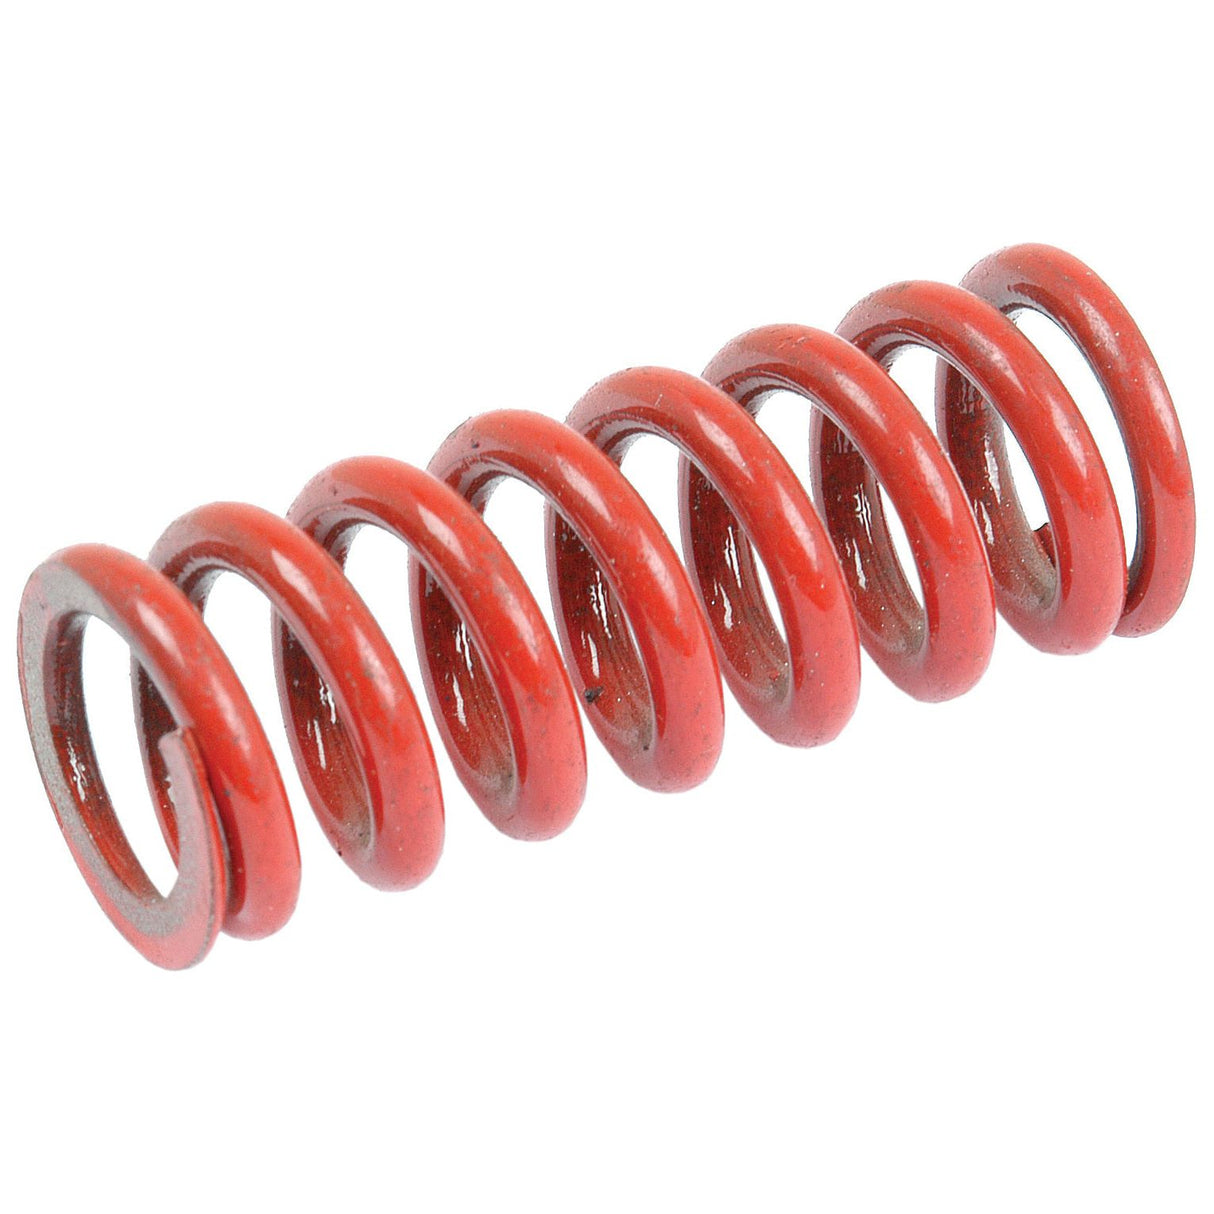 Clutch Spring - Red
 - S.8989 - Farming Parts